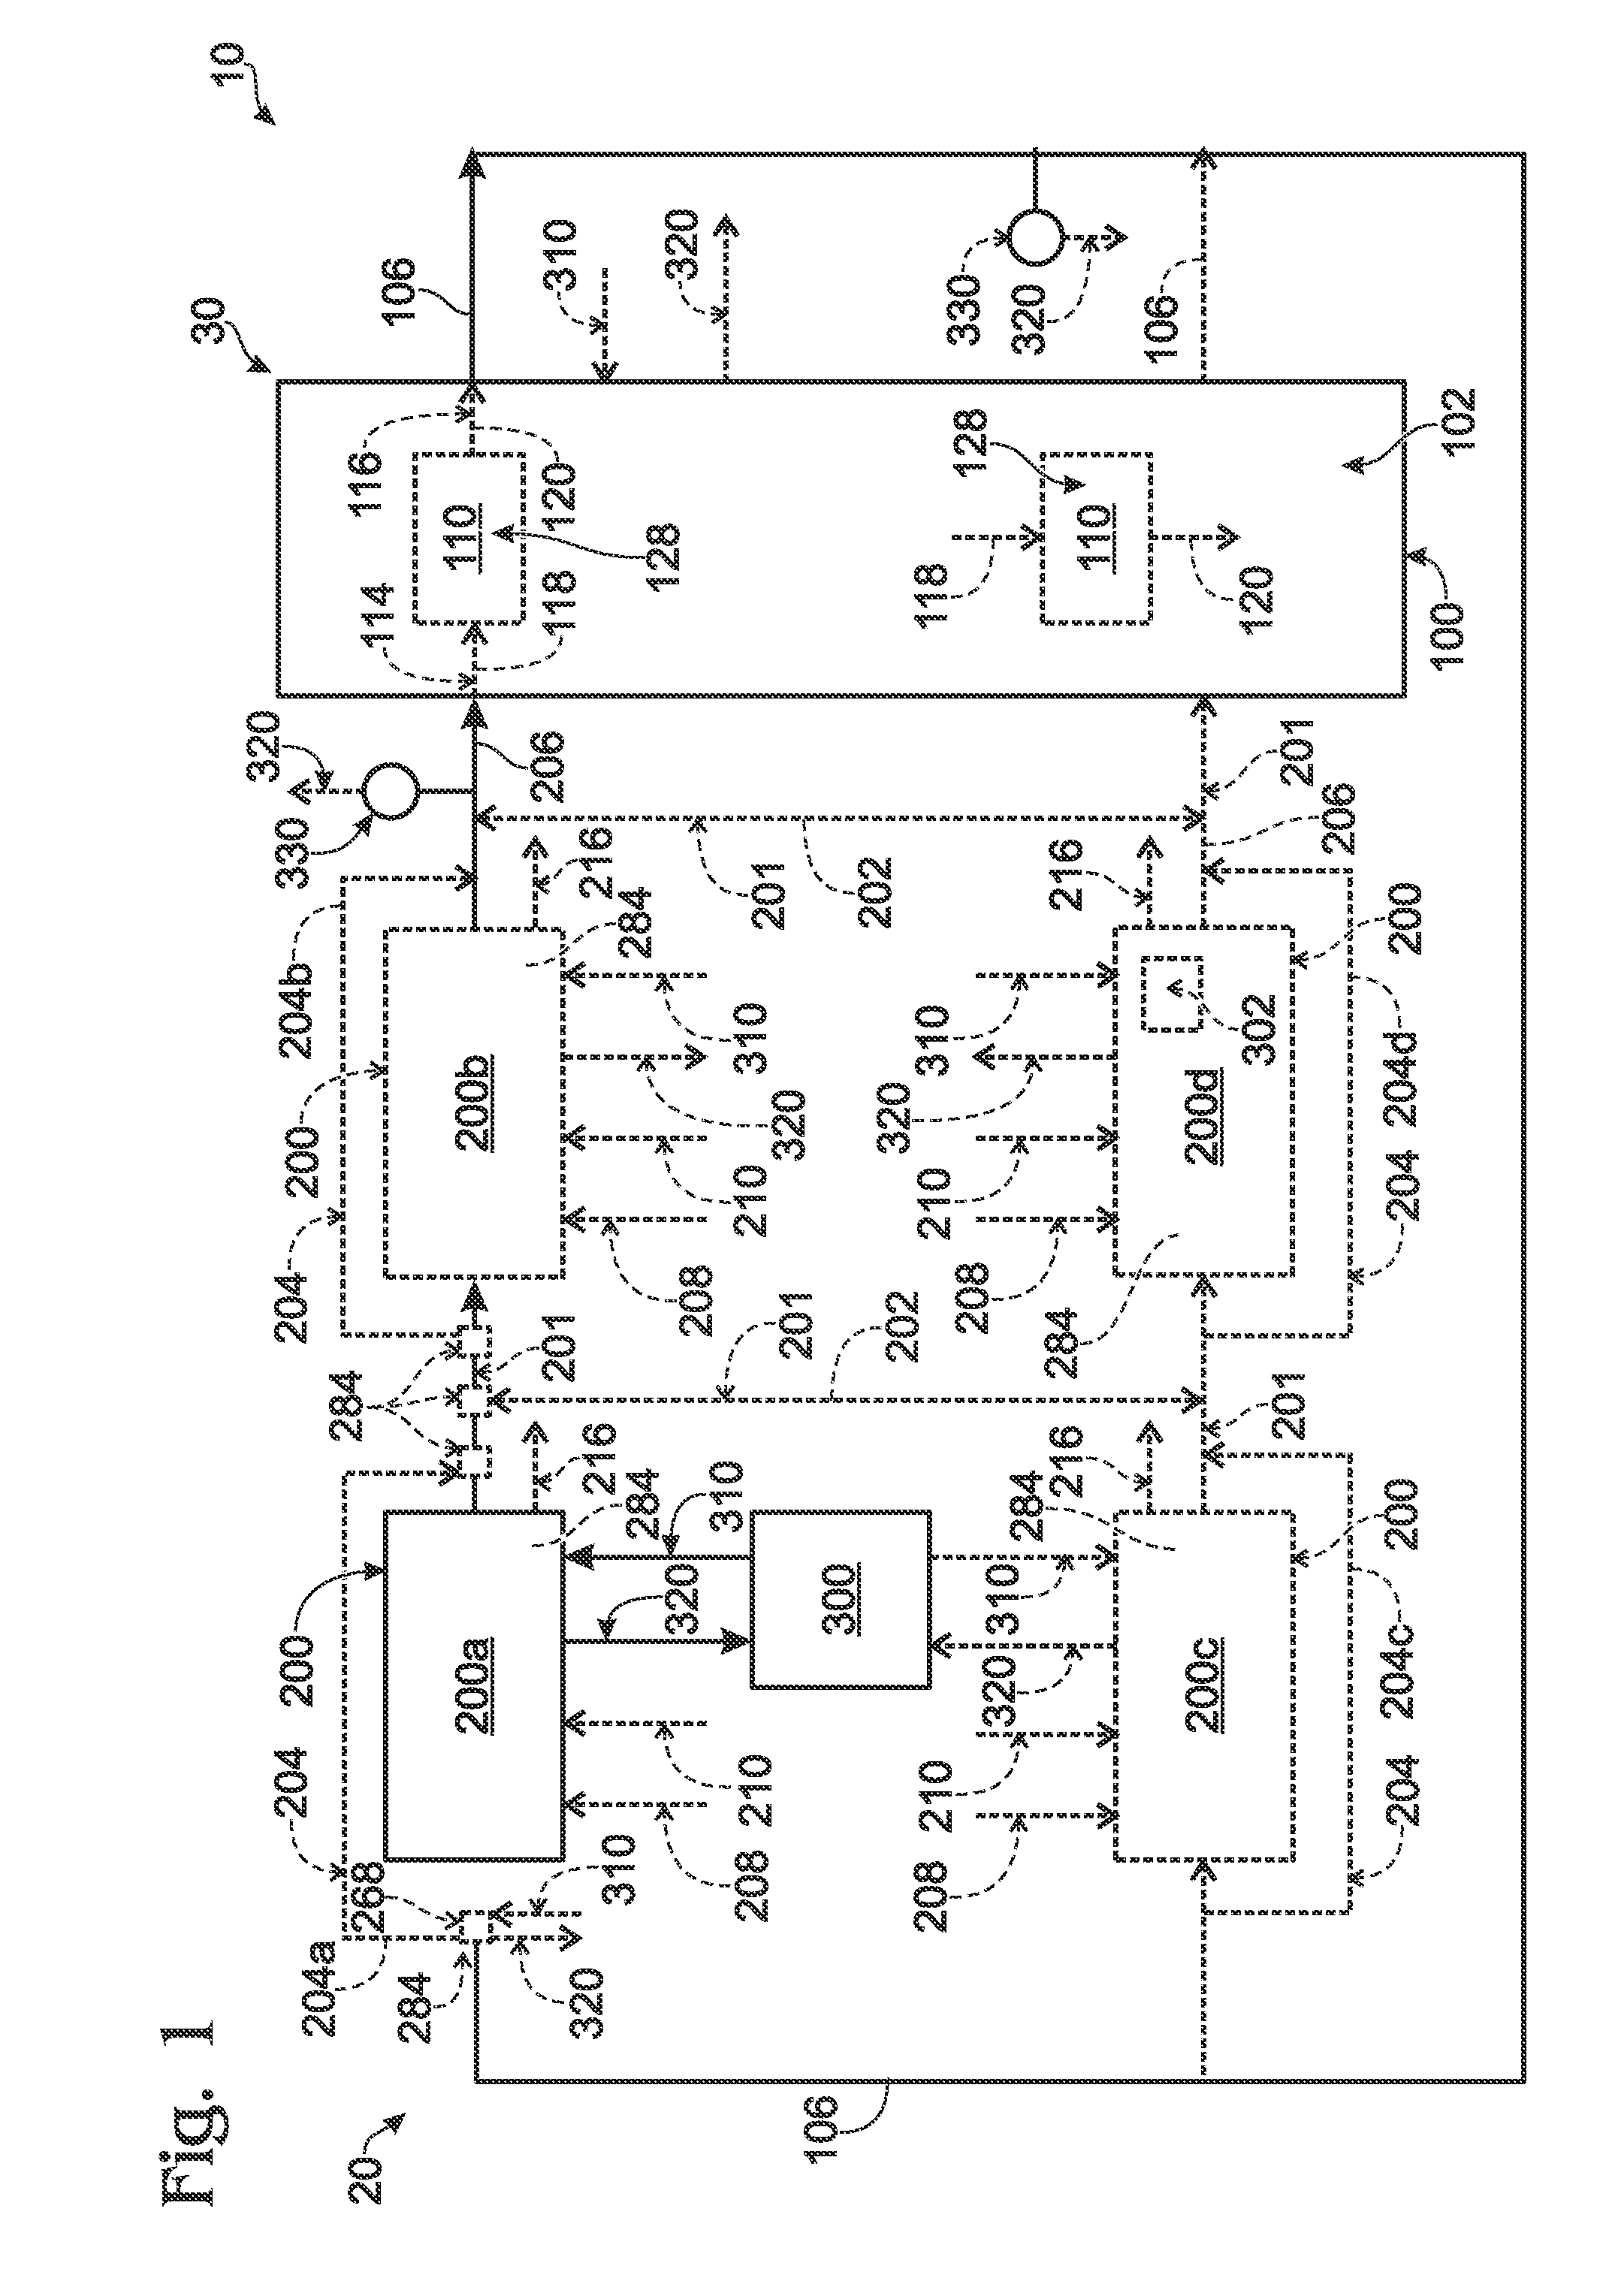 Systems and methods for cooling data centers and other electronic equipment